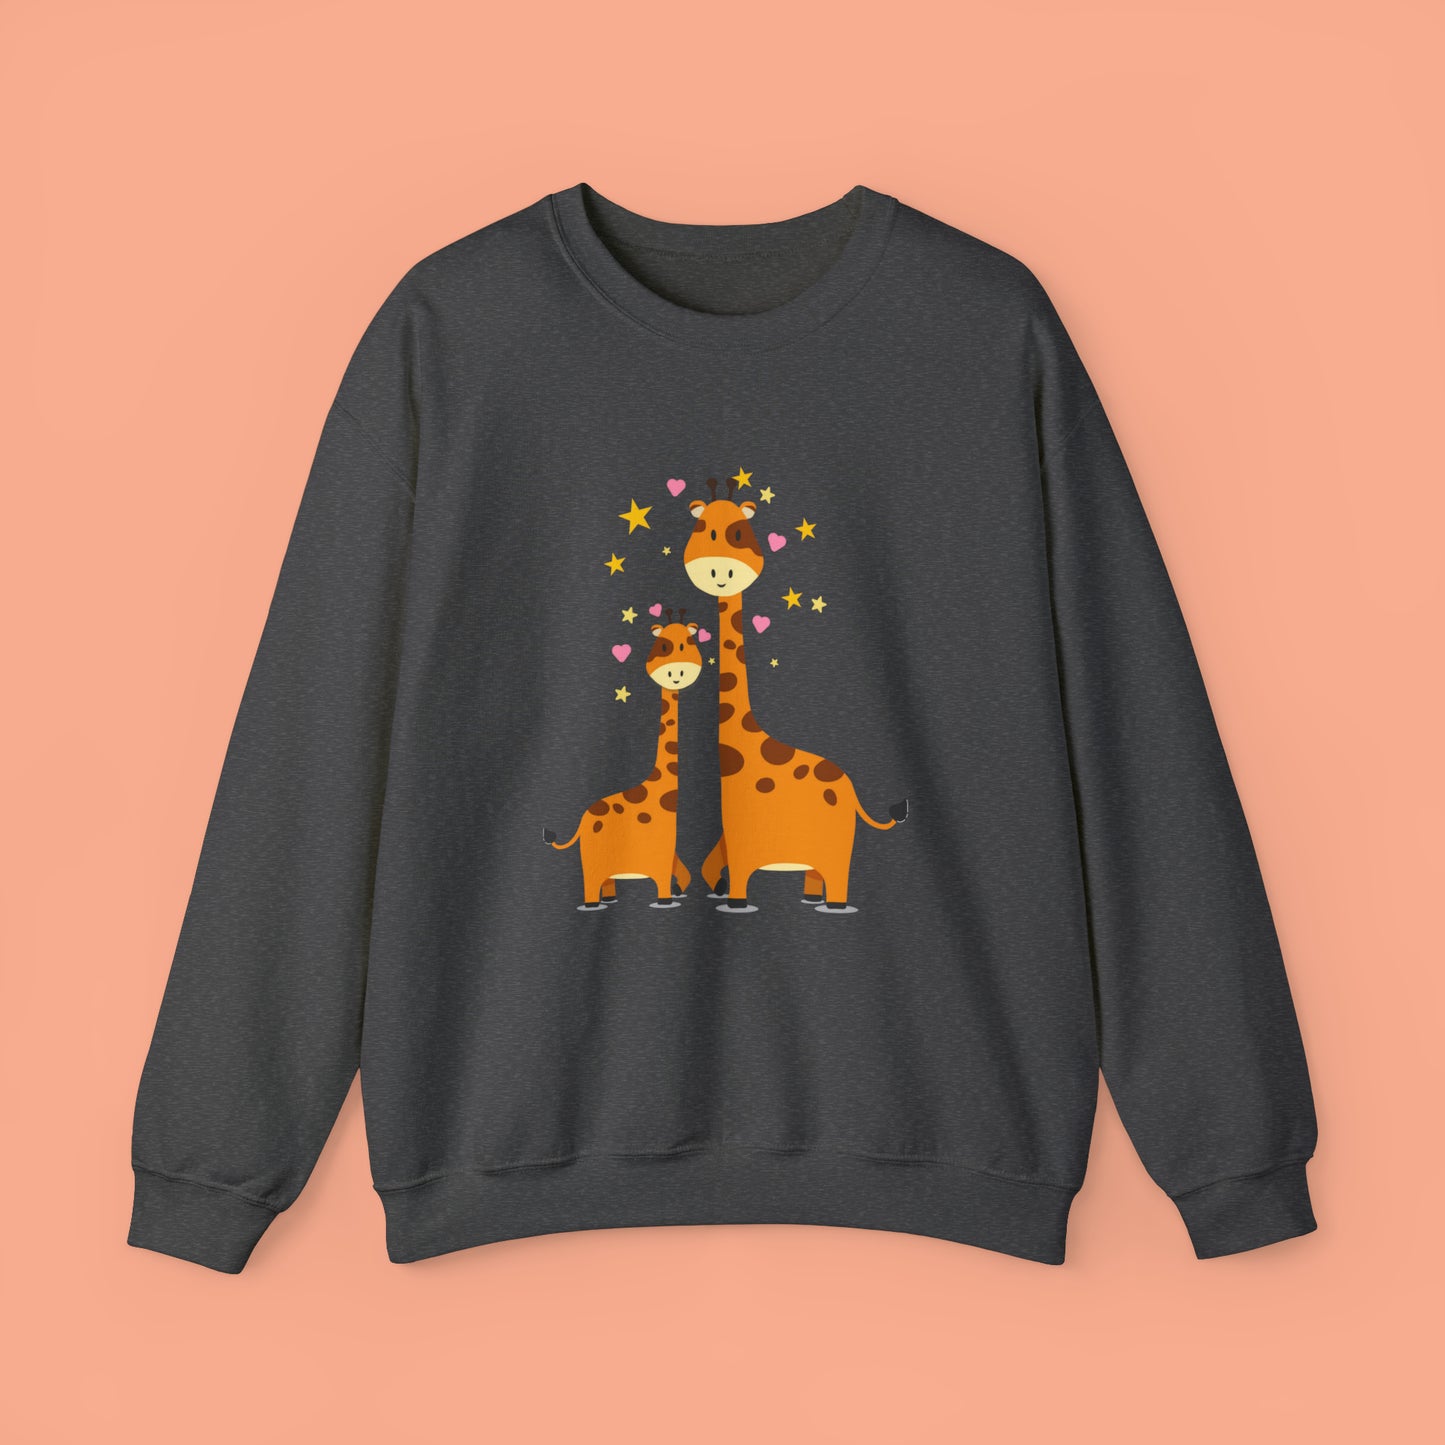 Love giraffes? Here’s the sweatshirt for you, celebrating adorable mama and baby giraffe love! Give the gift of this Unisex Heavy Blend™ Crewneck Sweatshirt or get one for yourself.